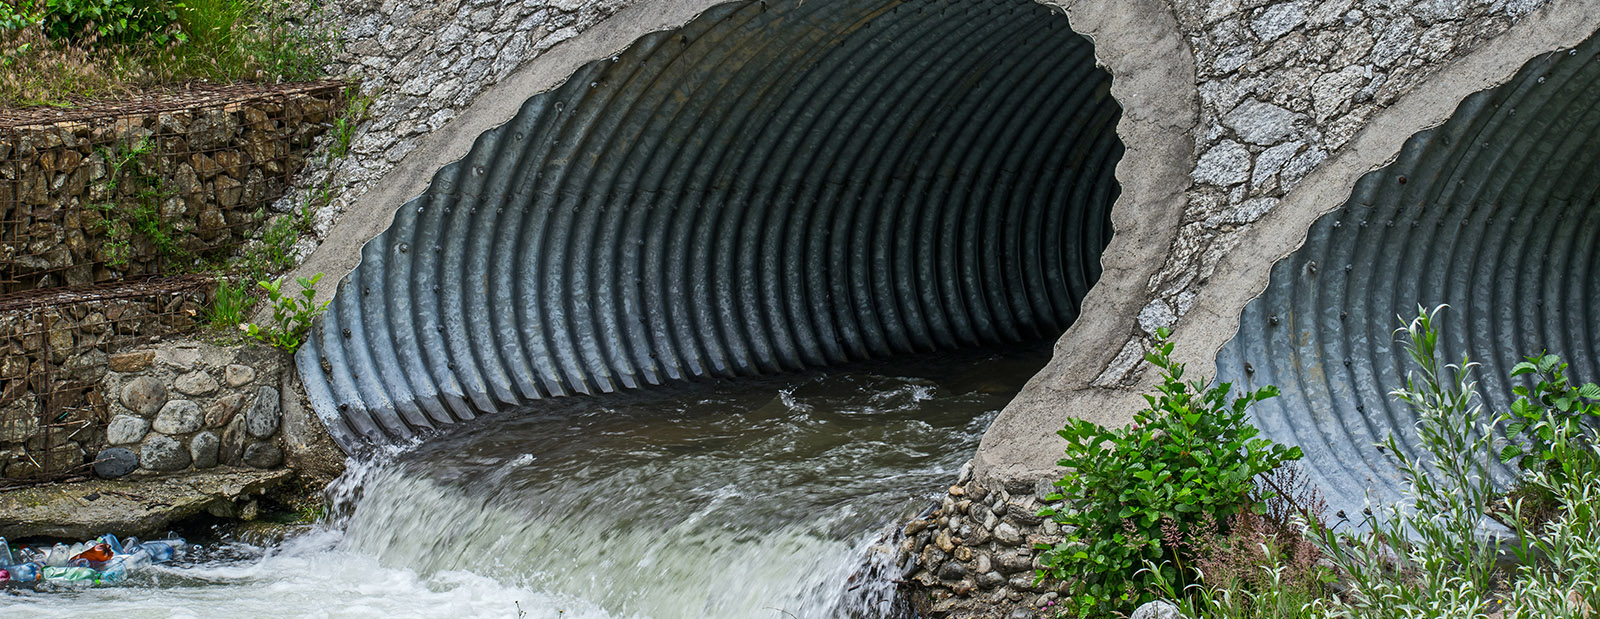 A stormwater outfall